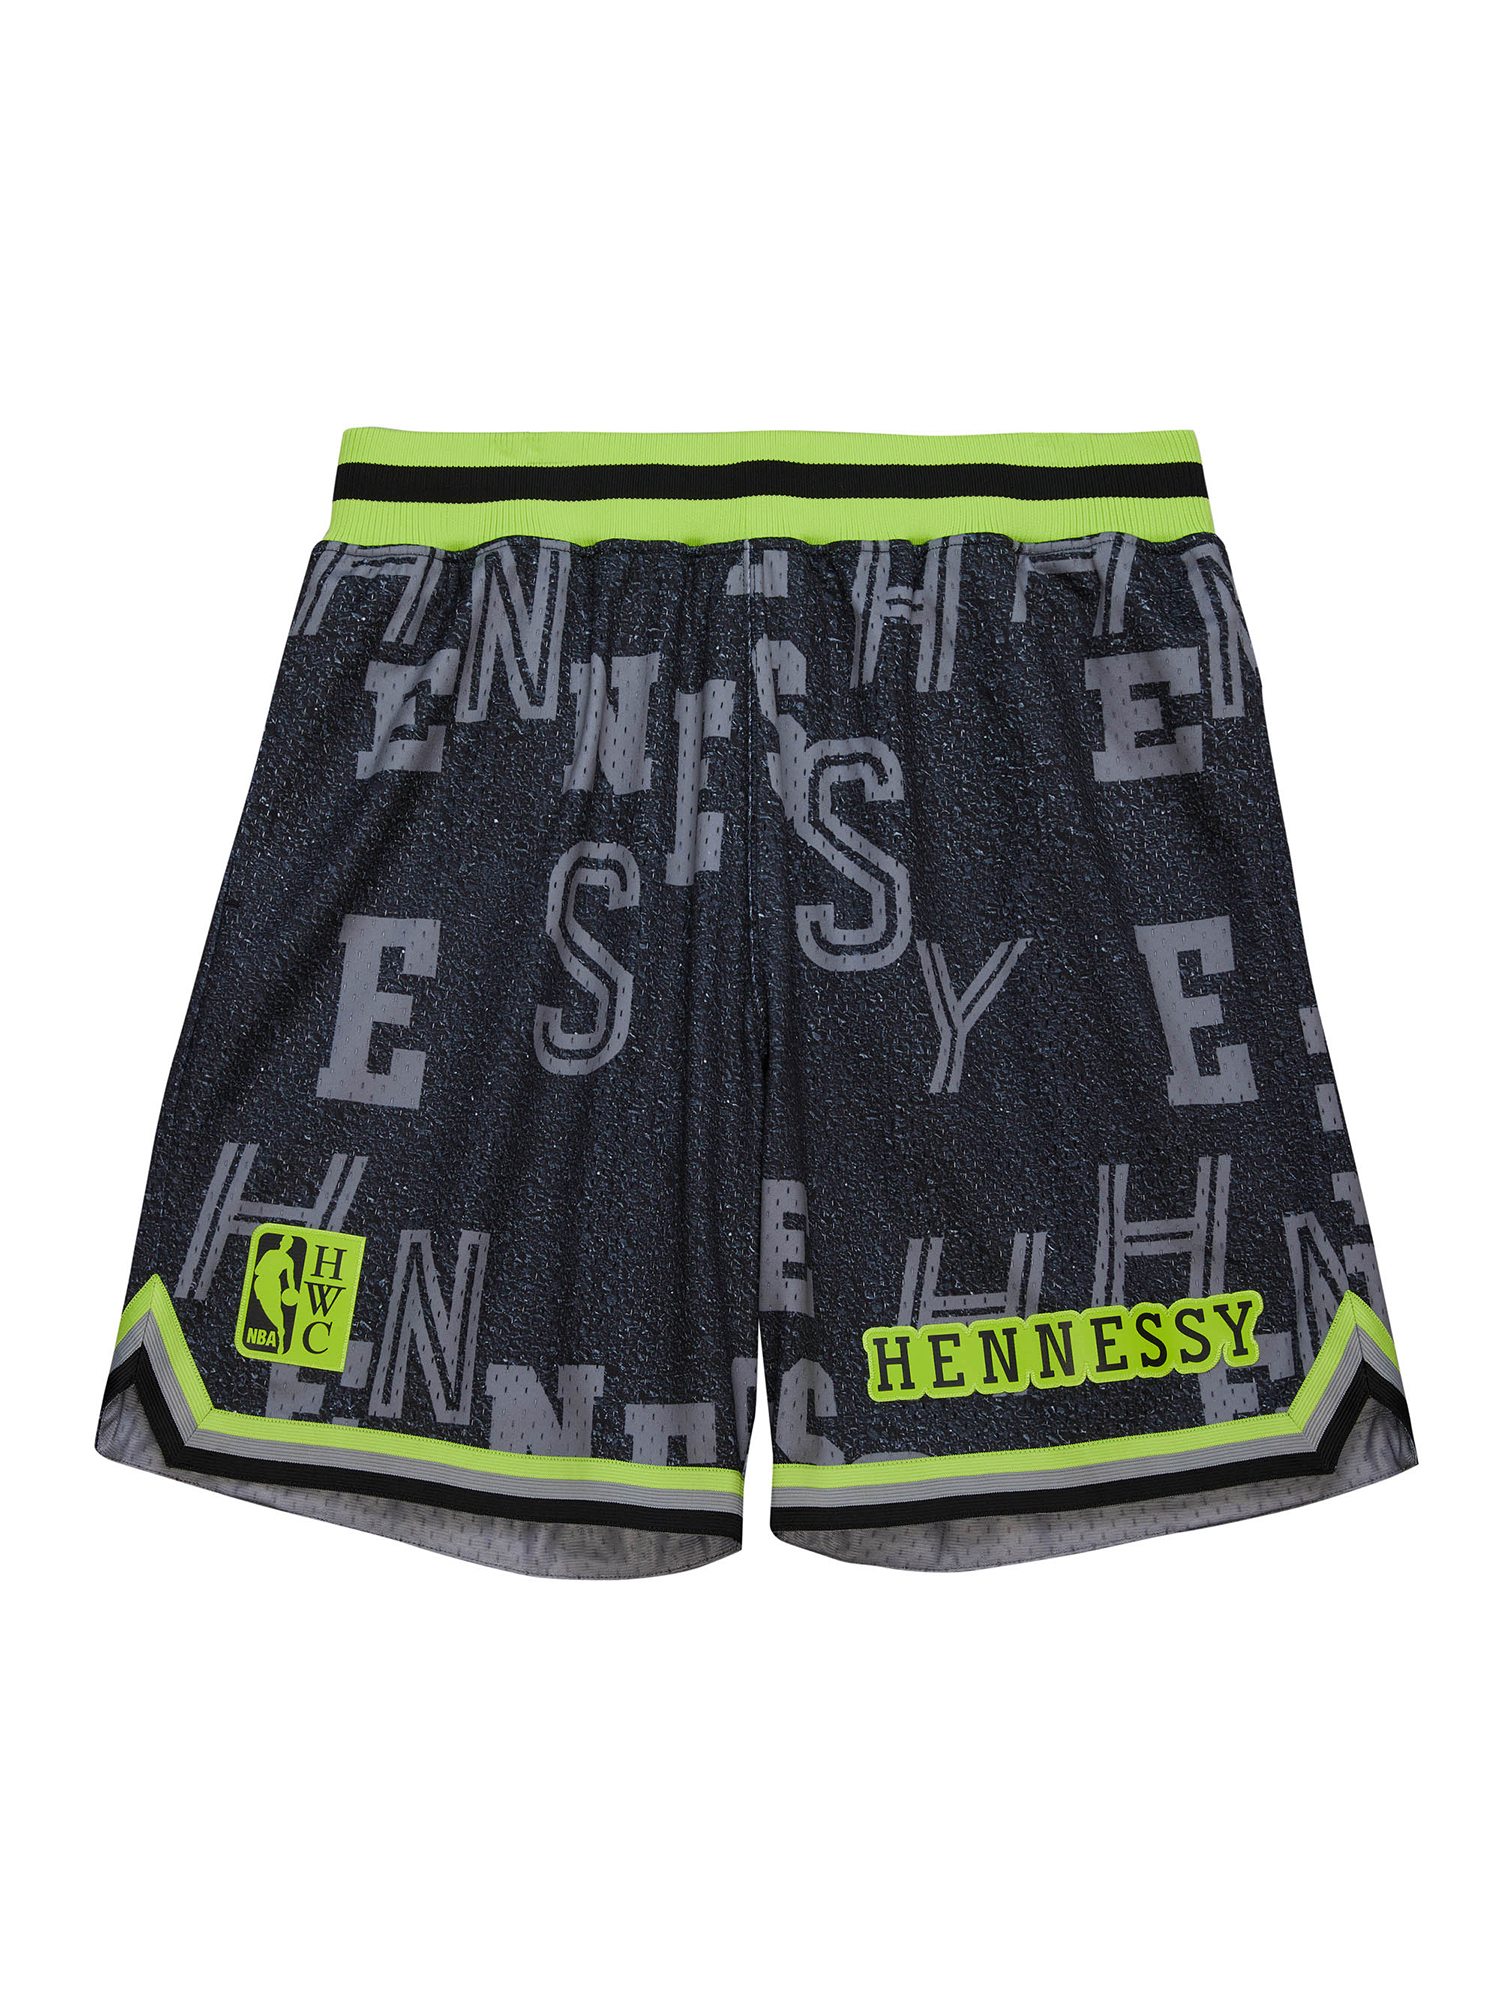 NBA×HENNESSY コラボ メッシュショーツ NBA HENNESSY NEON CONCRETE GAME DAY SHORTS COLLAB